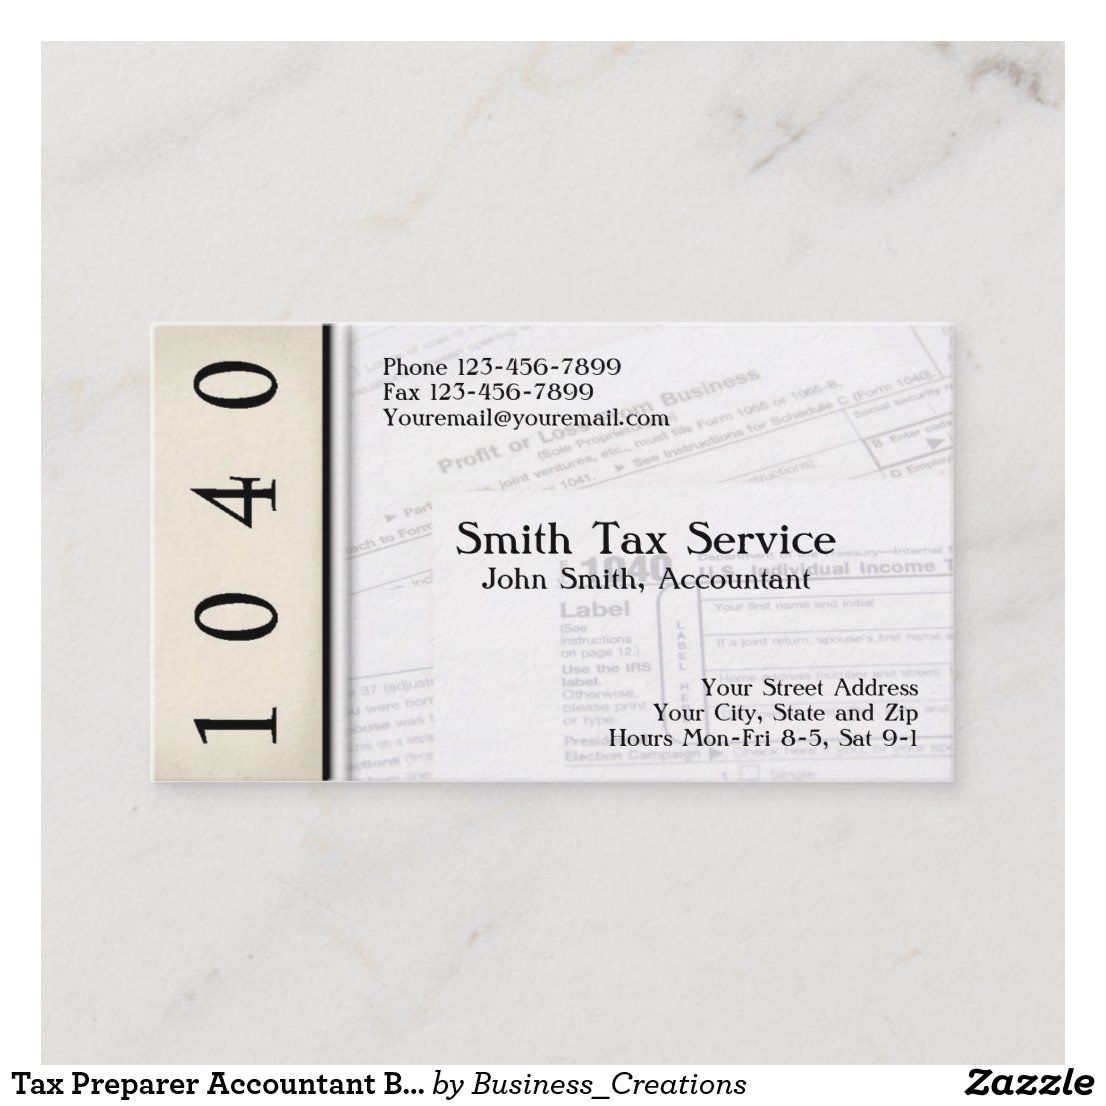 tax preparation business cards 3